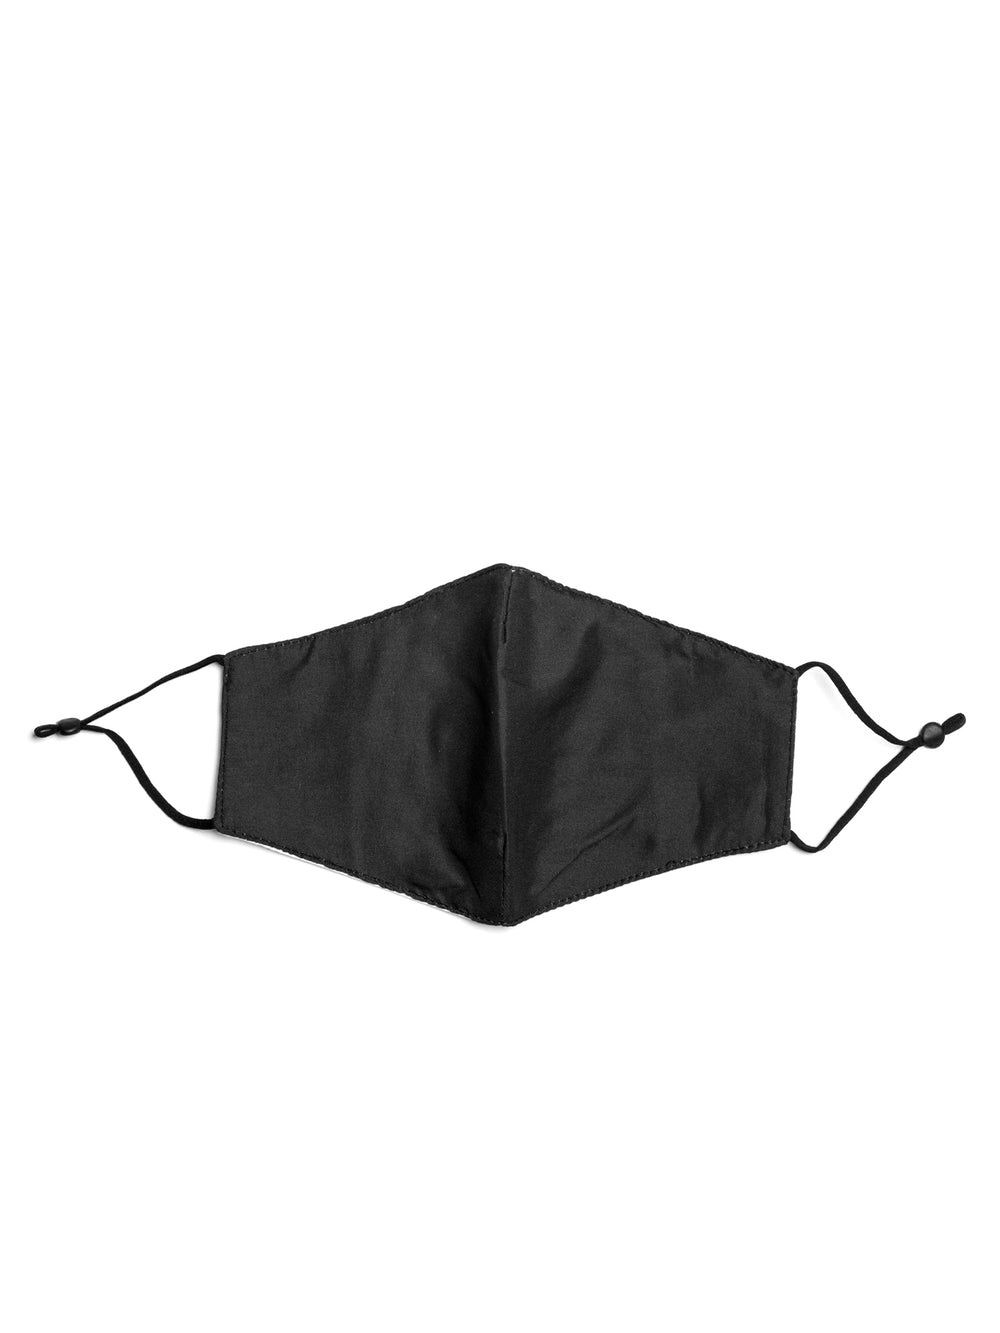 SCOUT & TRAIL FACE MASK - BLACK - CLEARANCE